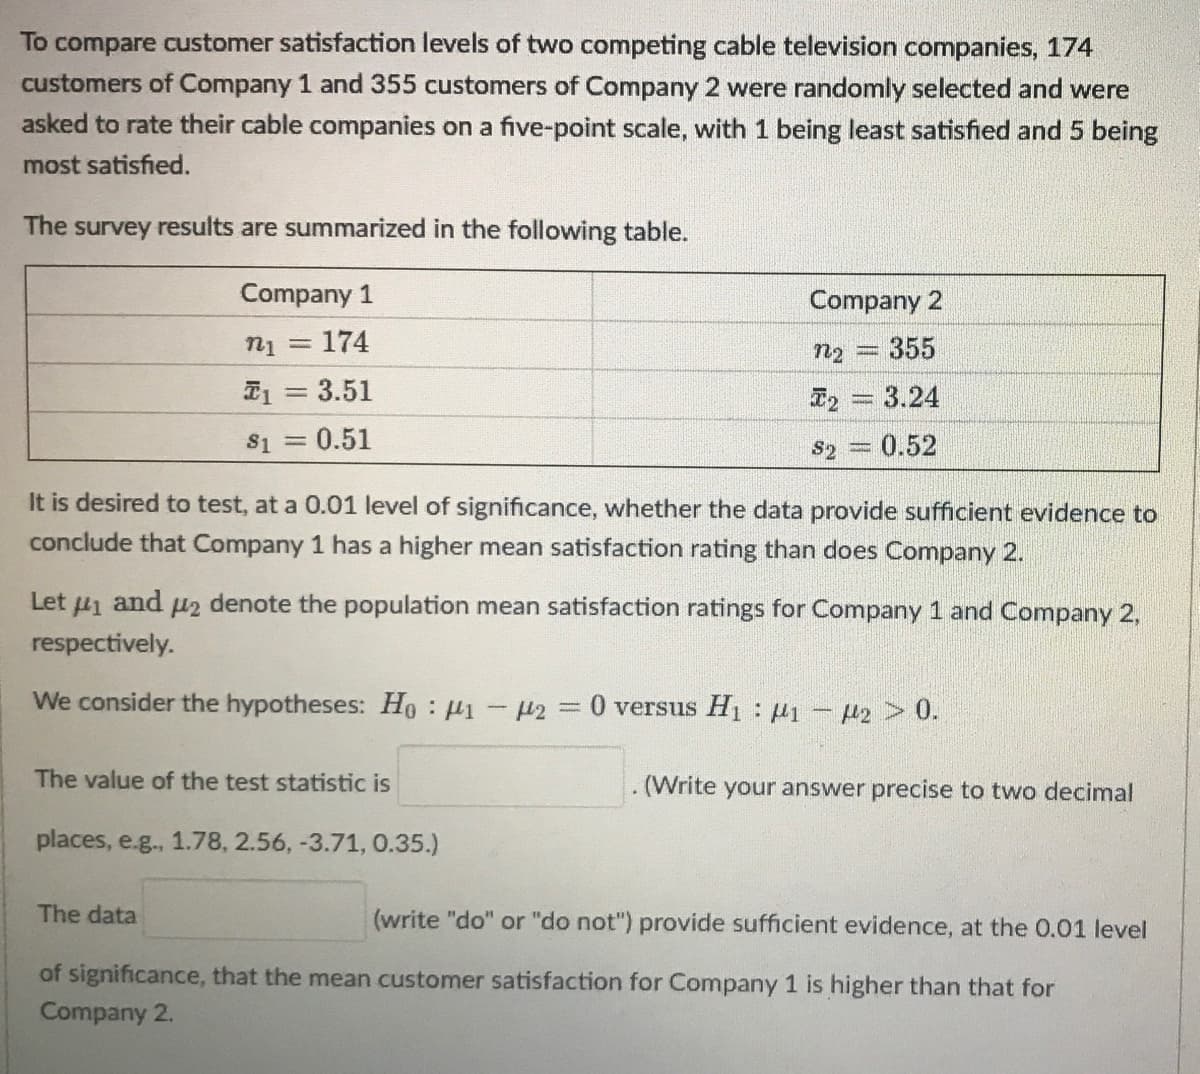 To compare customer satisfaction levels of two competing cable television companies, 174
customers of Company 1 and 355 customers of Company 2 were randomly selected and were
asked to rate their cable companies on a five-point scale, with 1 being least satisfied and 5 being
most satisfied.
The
survey
results are summarized in the following table.
Company 1
Company 2
= 174
n2 = 355
I1 = 3.51
T2 = 3.24
S1 = 0.51
S2 = 0.52
It is desired to test, at a 0.01 level of significance, whether the data provide sufficient evidence to
conclude that Company 1 has a higher mean satisfaction rating than does Company 2.
Let u1 and u2 denote the population mean satisfaction ratings for Company 1 and Company 2,
respectively.
We consider the hypotheses: Ho : µ1 - H2 = 0 versus H1: 1- P2 > 0.
%3D
The value of the test statistic is
(Write your answer precise to two decimal
places, e.g., 1.78, 2.56, -3.71, 0.35.)
The data
(write "do" or "do not") provide sufficient evidence, at the 0.01 level
of significance, that the mean customer satisfaction for Company 1 is higher than that for
Company 2.
